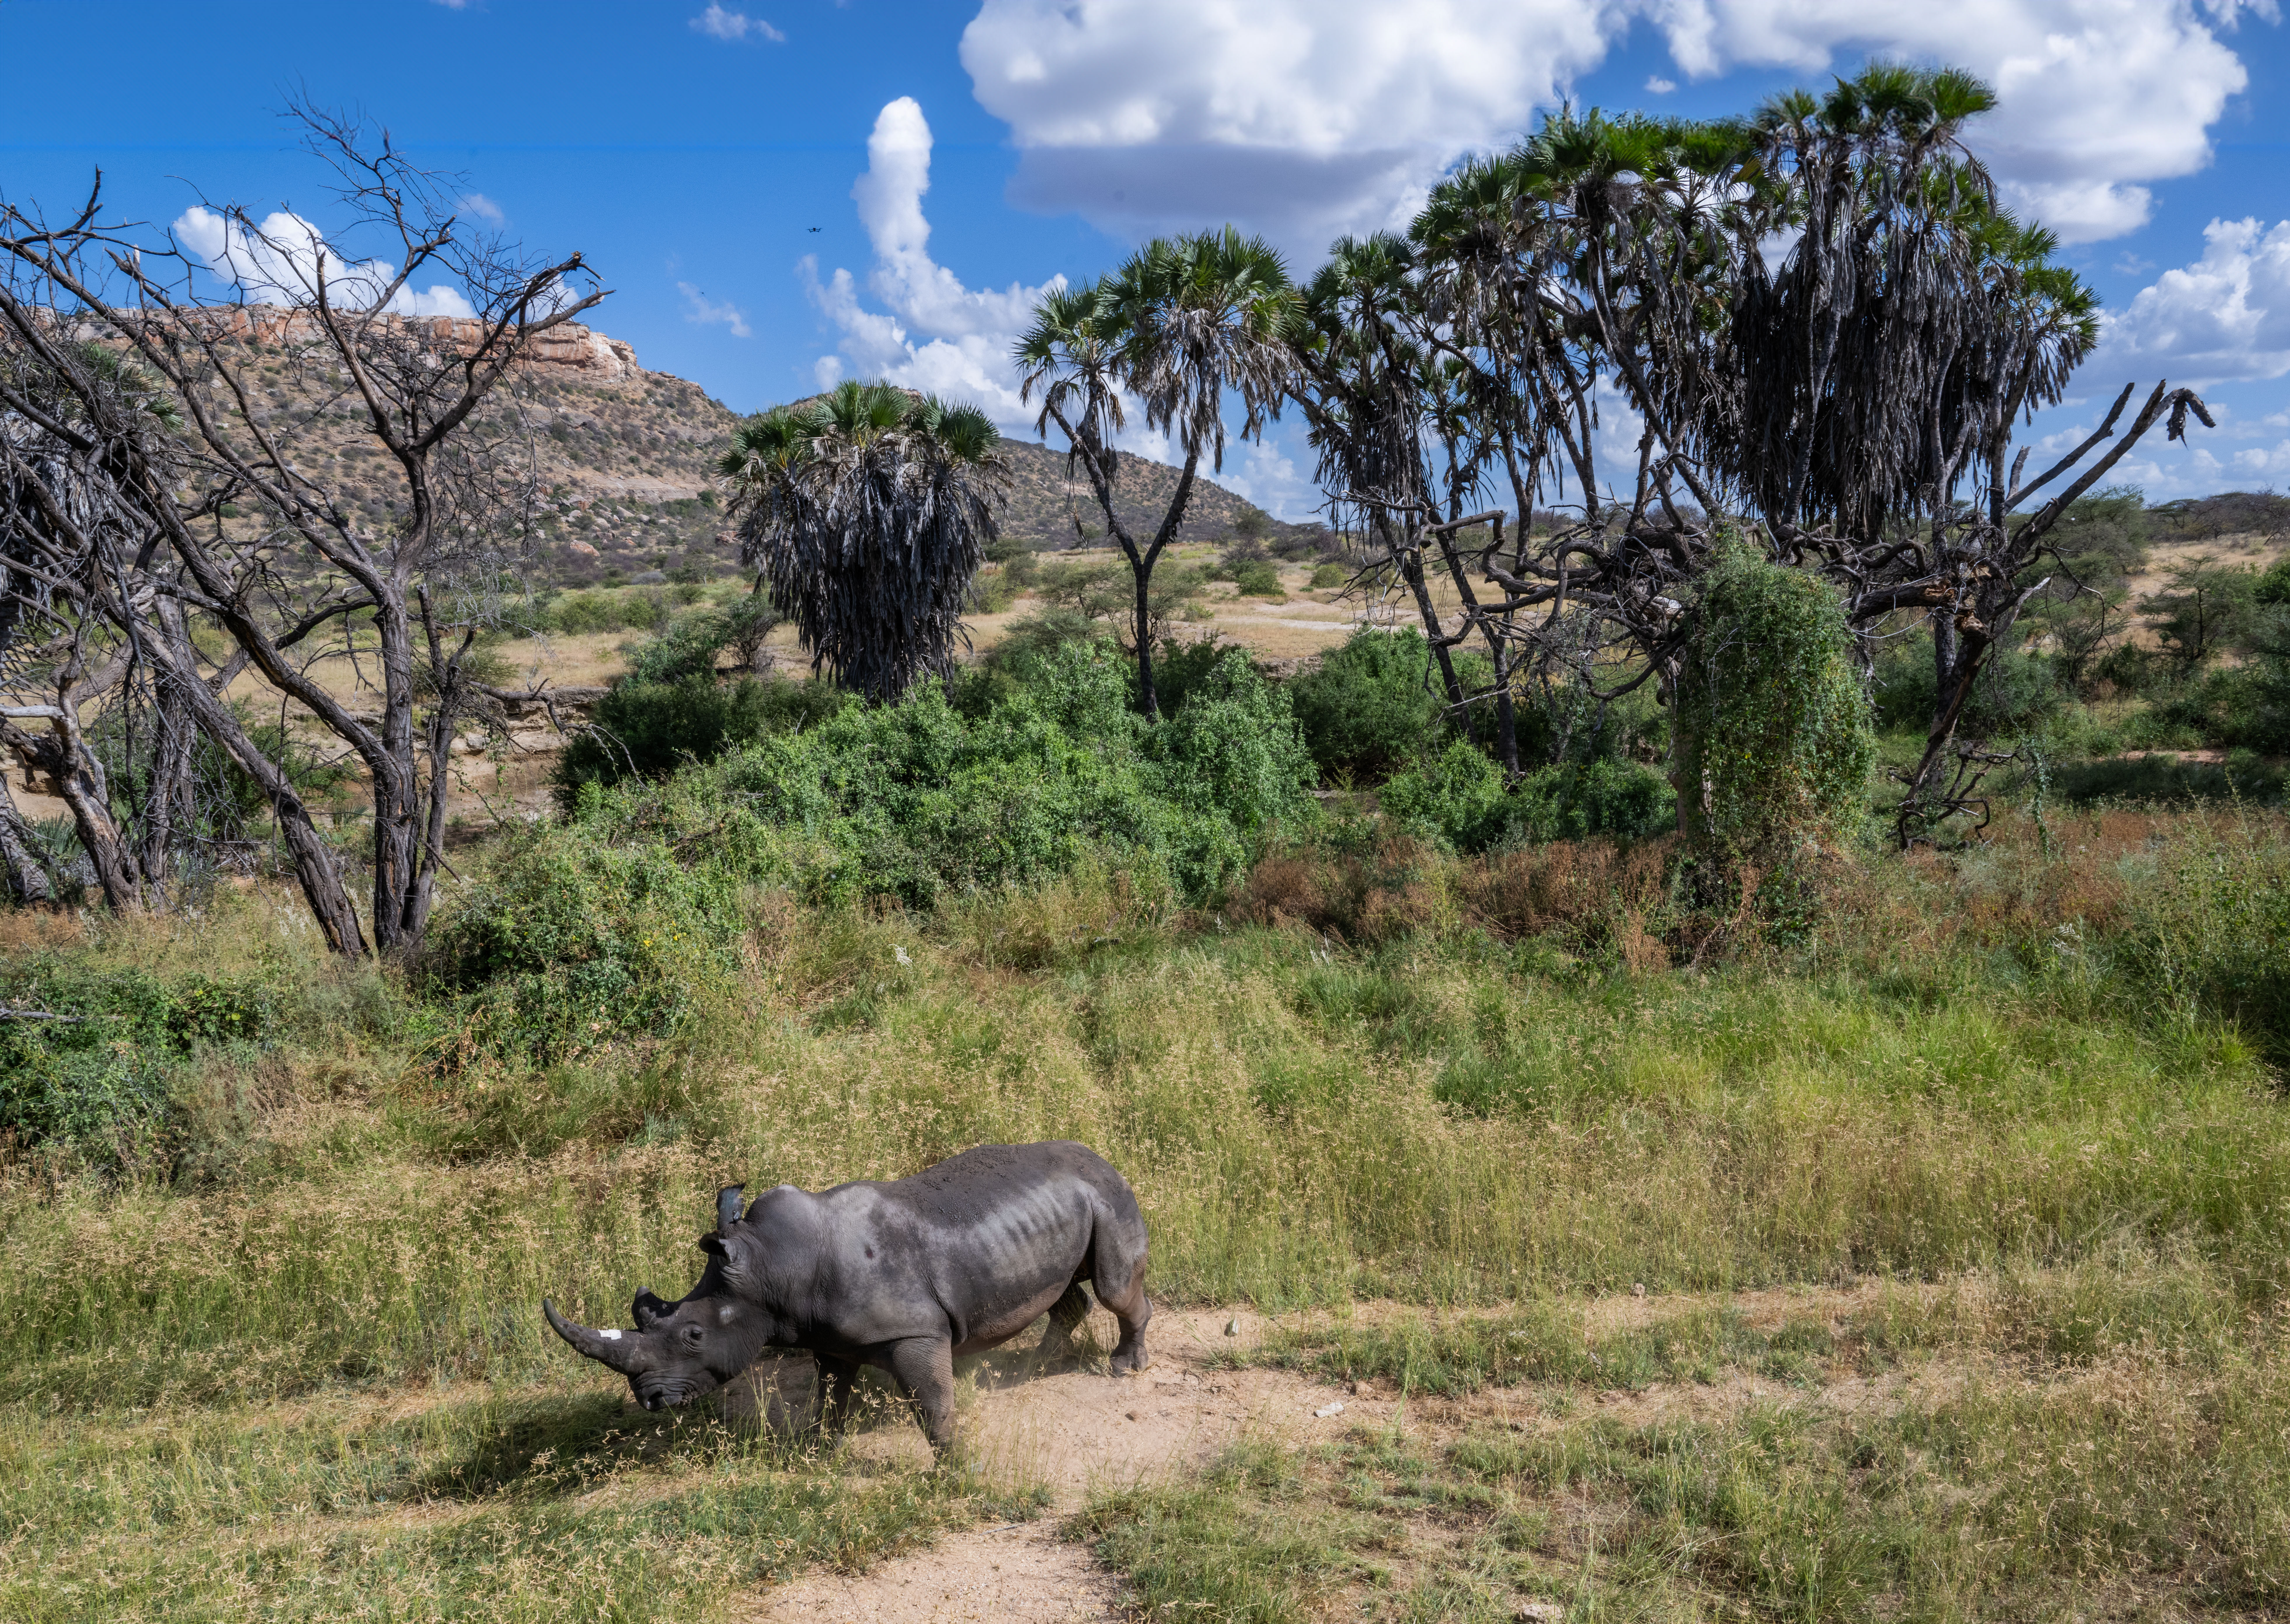 In Photos: 4 White Rhinos Relocated To Sera Conservancy From Lewa